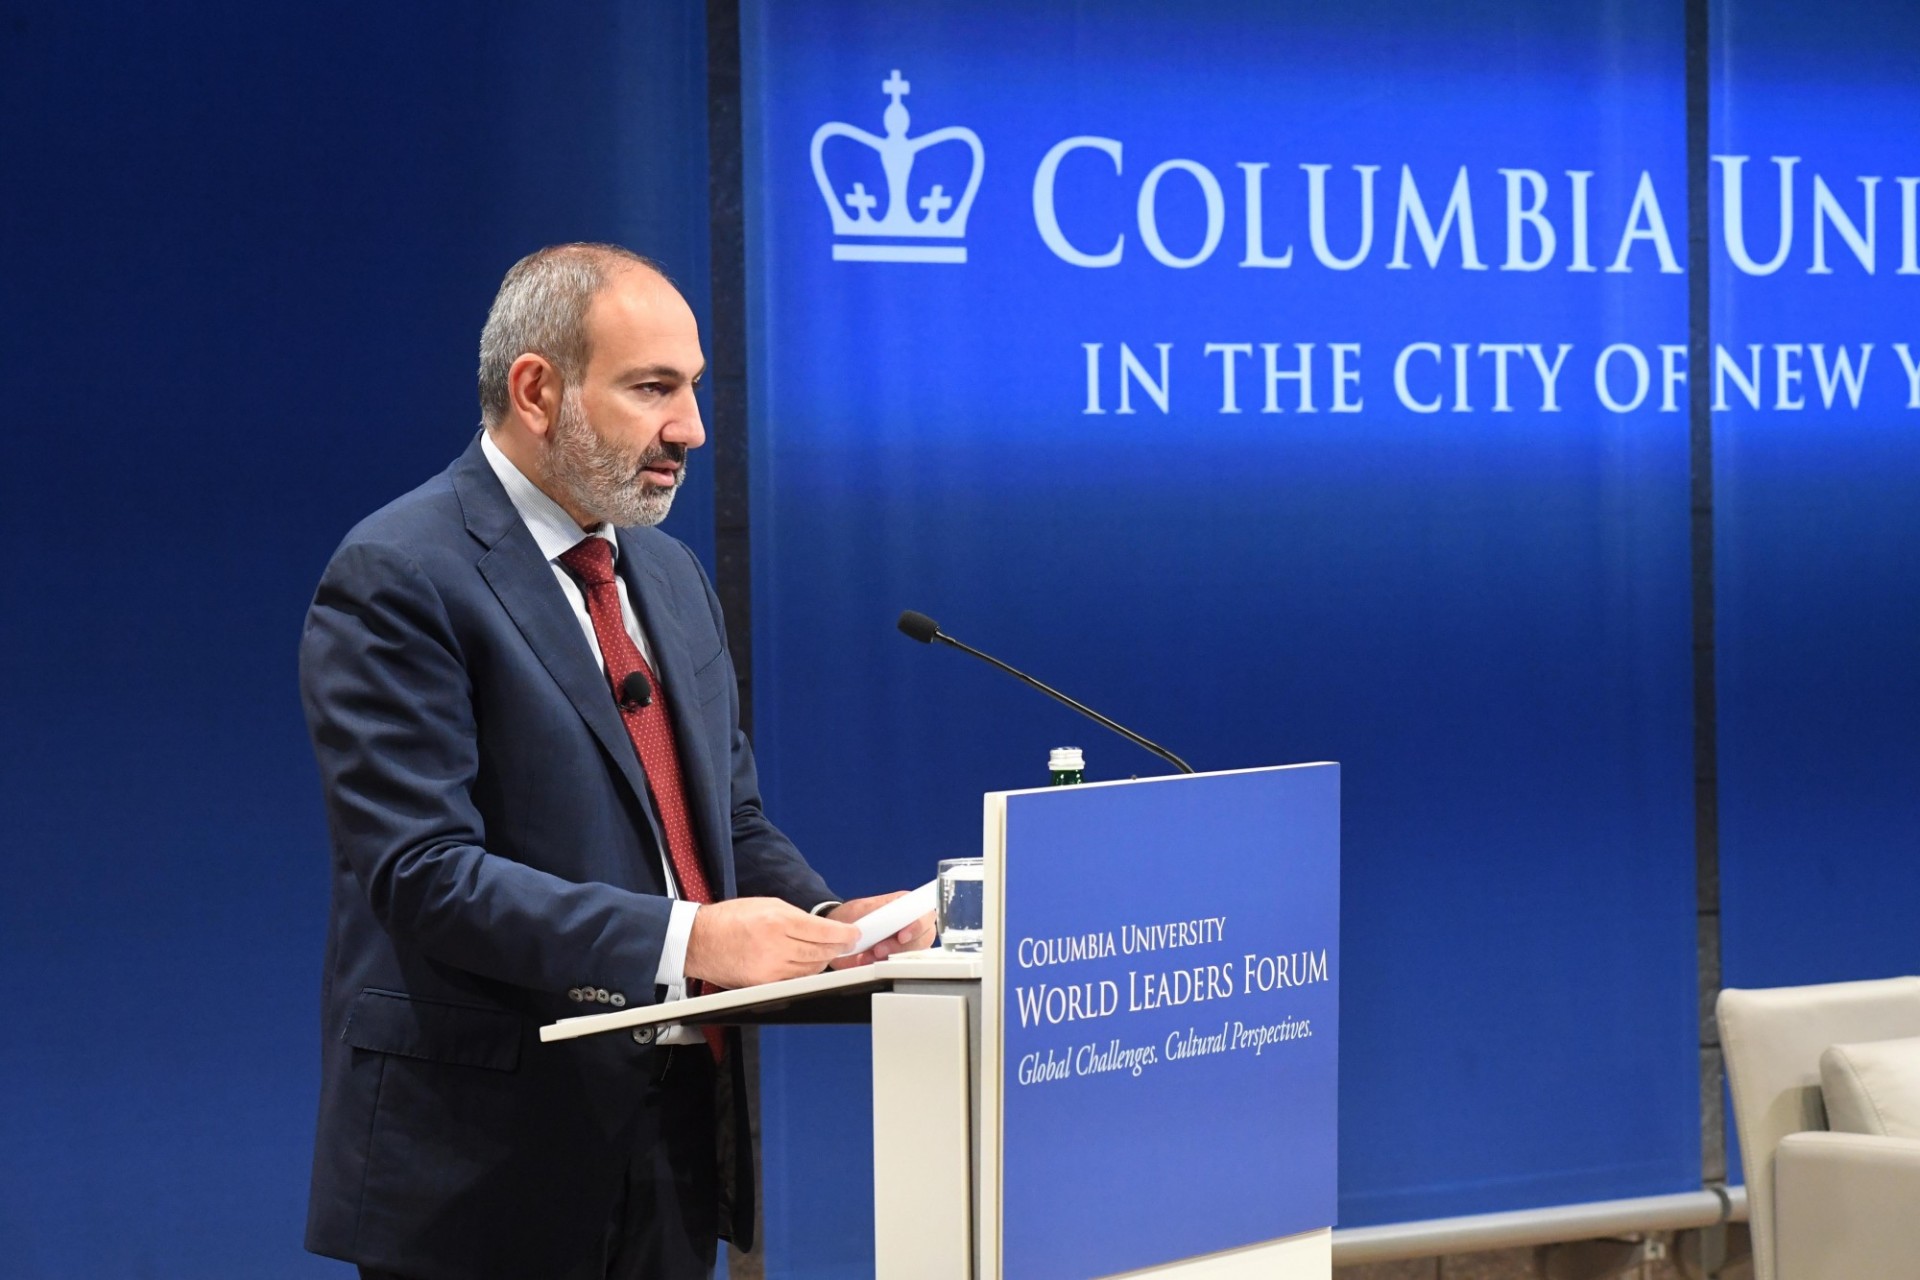 Prime Minister Nikol Pashinyan of Armenia delivers his address to Columbia University students, faculty and staff.